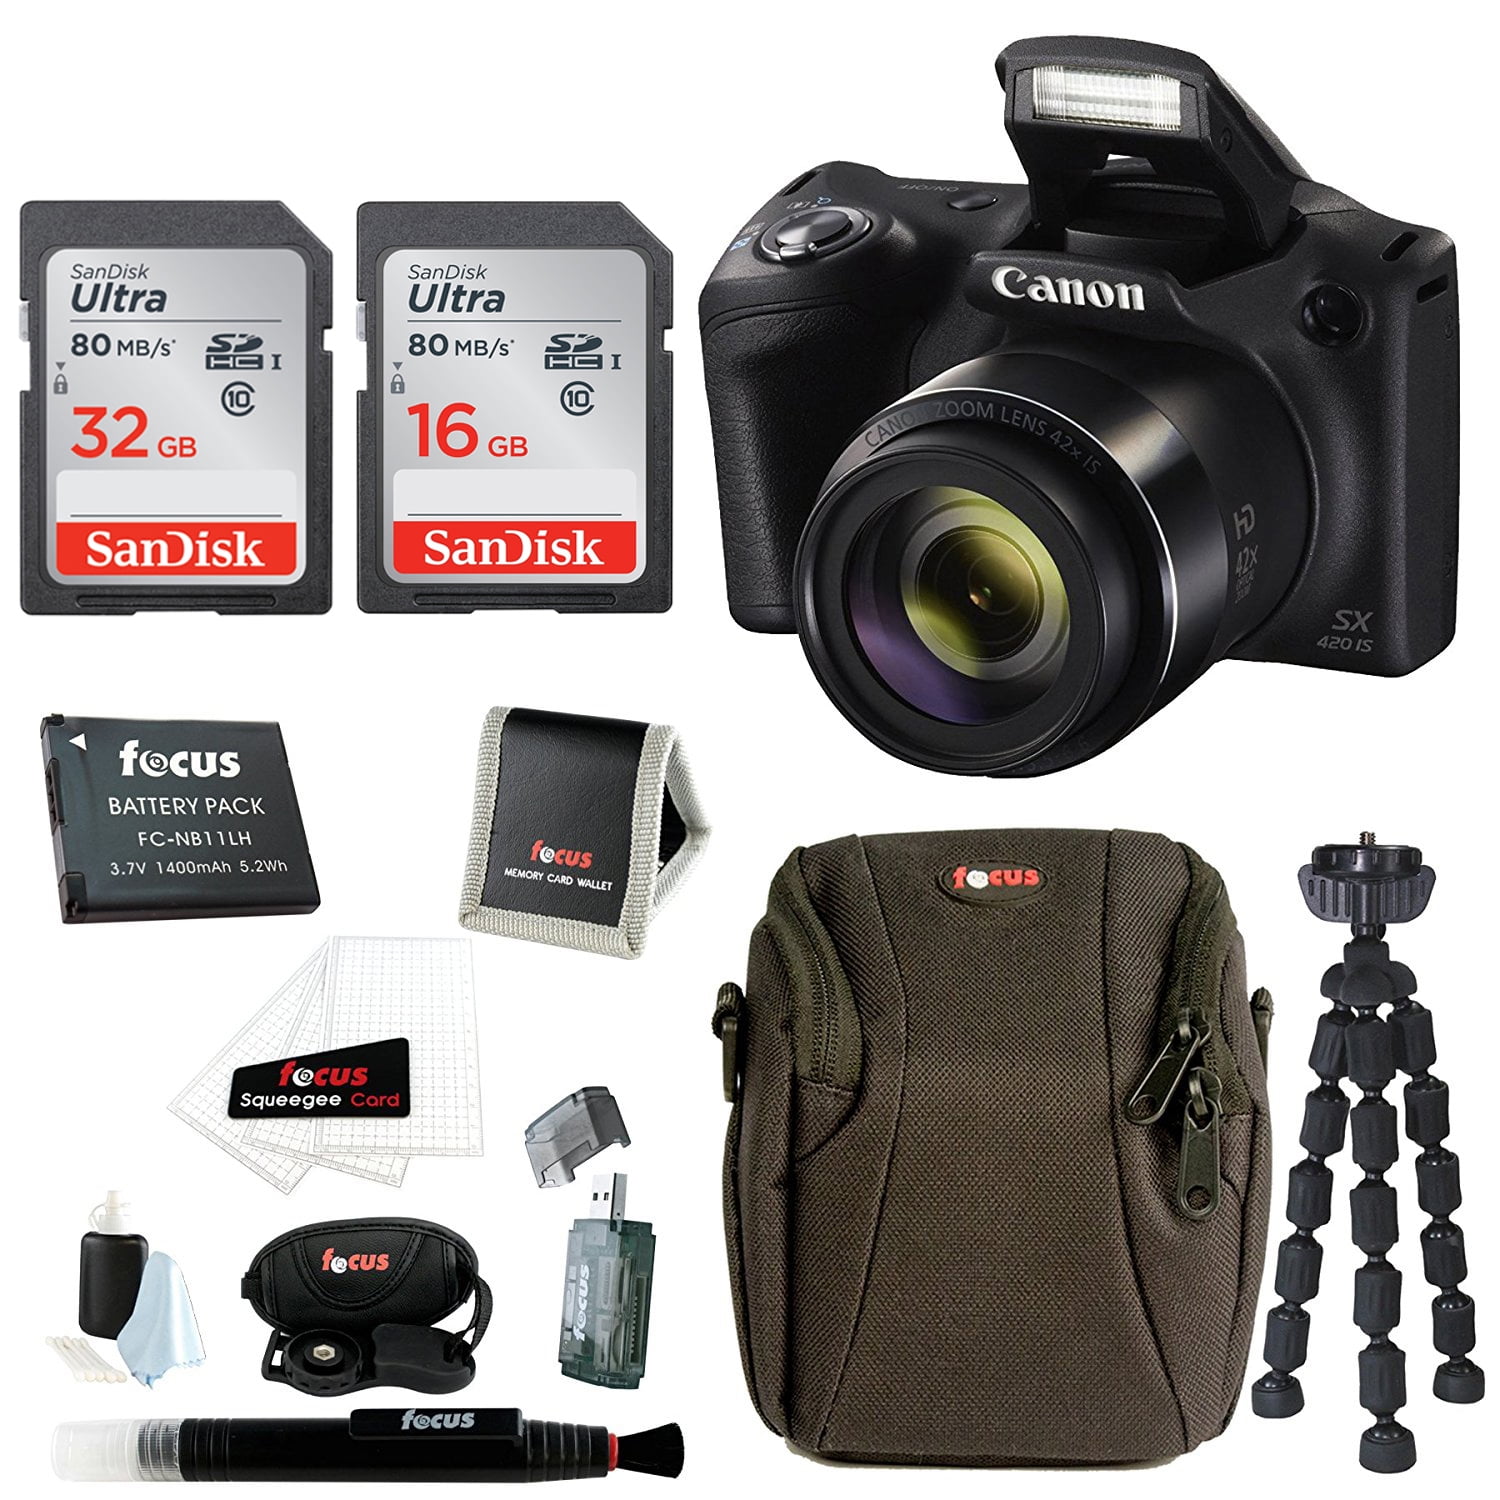 Canon PowerShot SX420 IS Digital Camera with 32GB SD Memory Card Accessory Bundle Black 